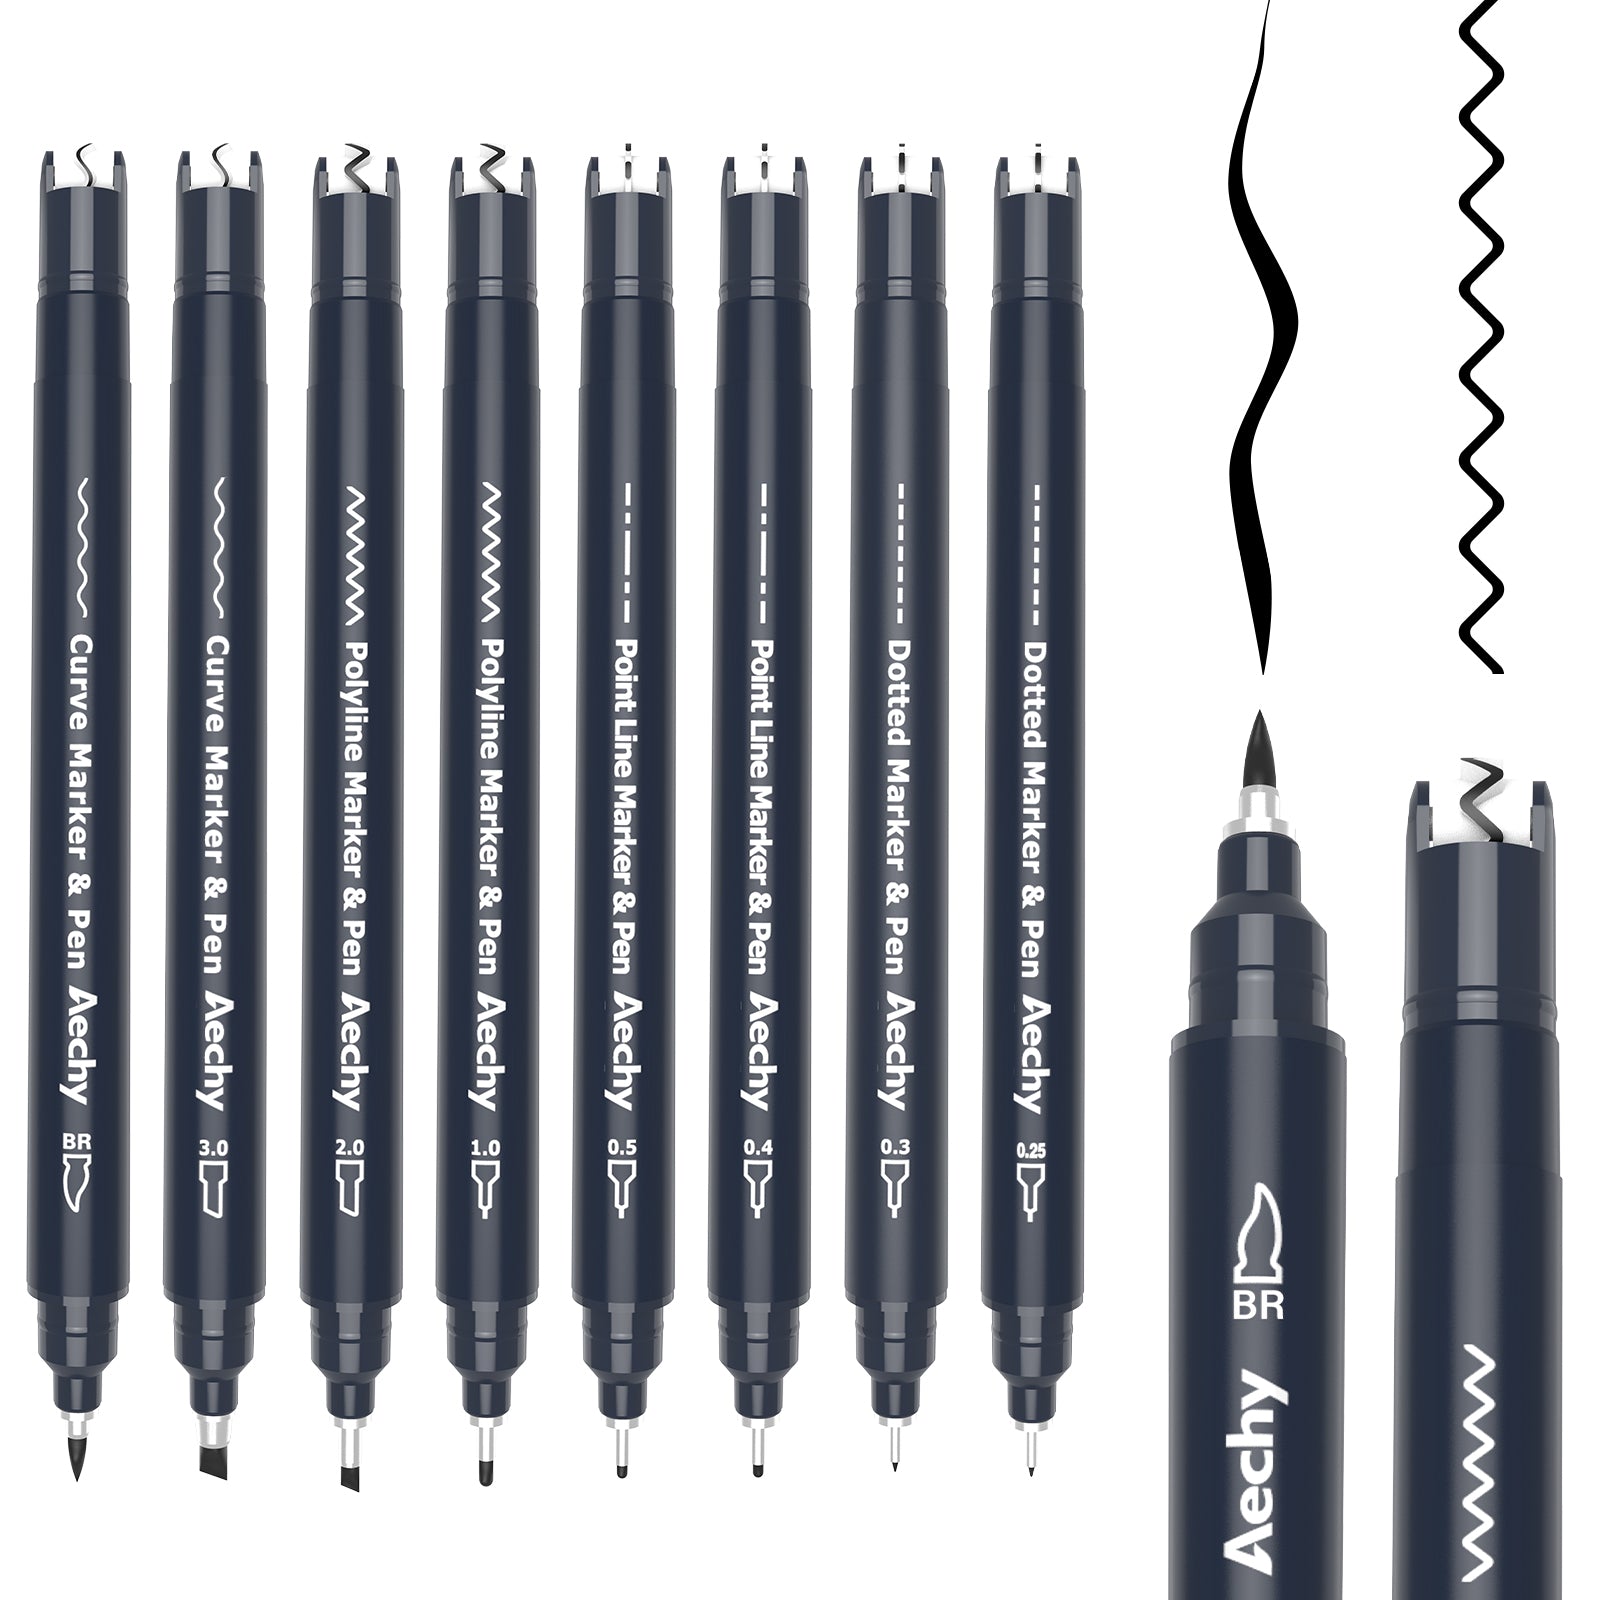  AECHY Calligraphy Curve Pens for Hand Lettering, Dual Tip Pens  with 4 Different Curve Shapes, 8 Size Dual Calligraphy Brush Pen Set for  Lettering Drawing Scrapbook Art Supplies : Office Products